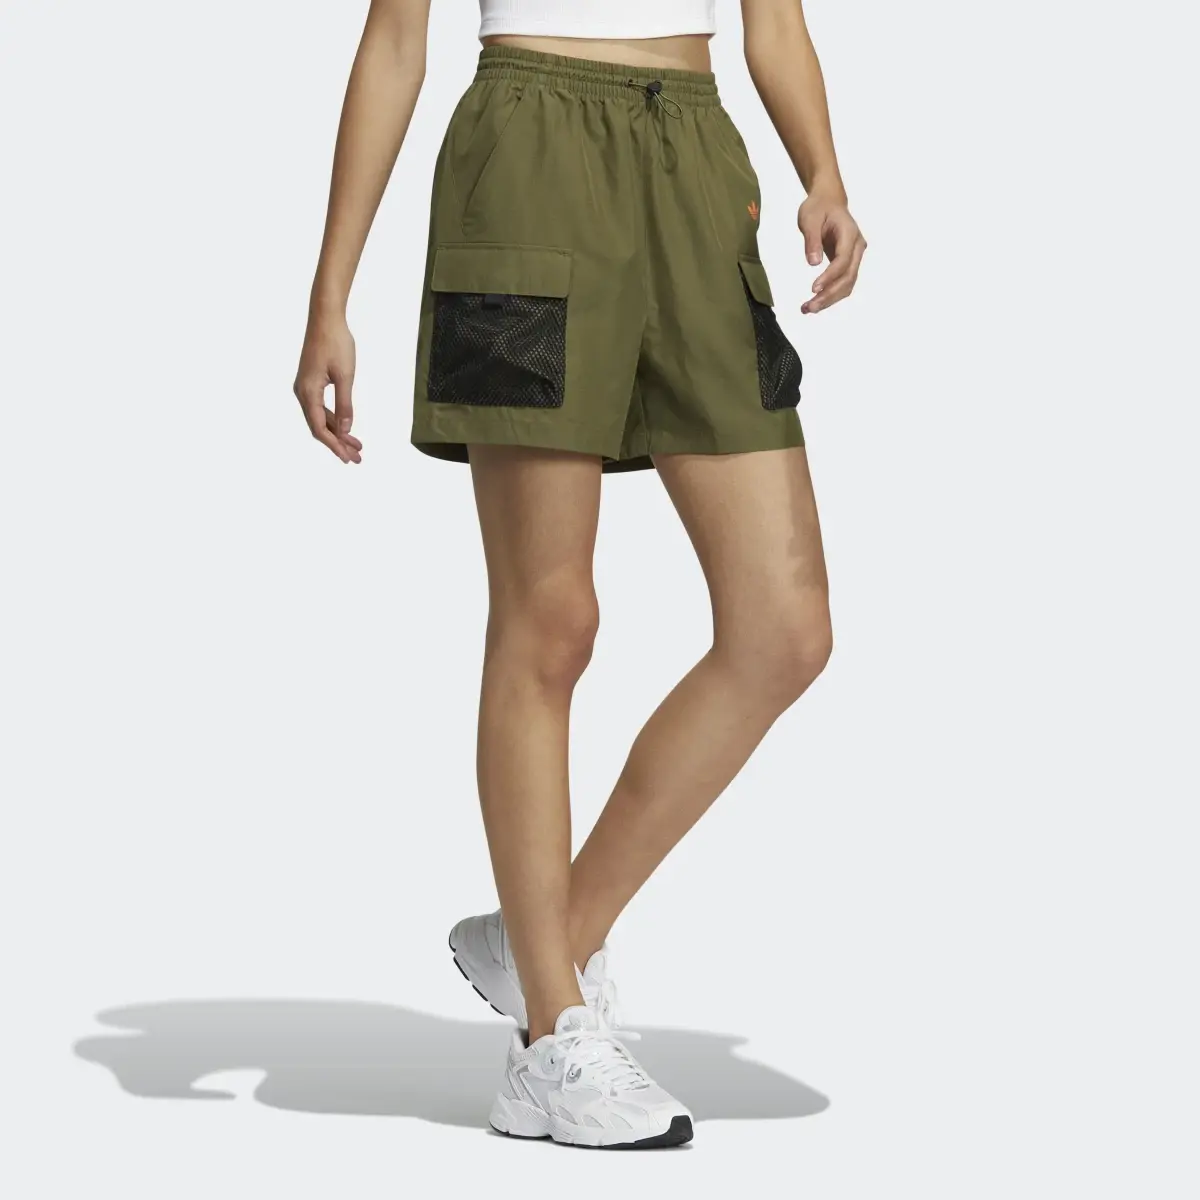 Adidas Outdoor Graphic Shorts. 3